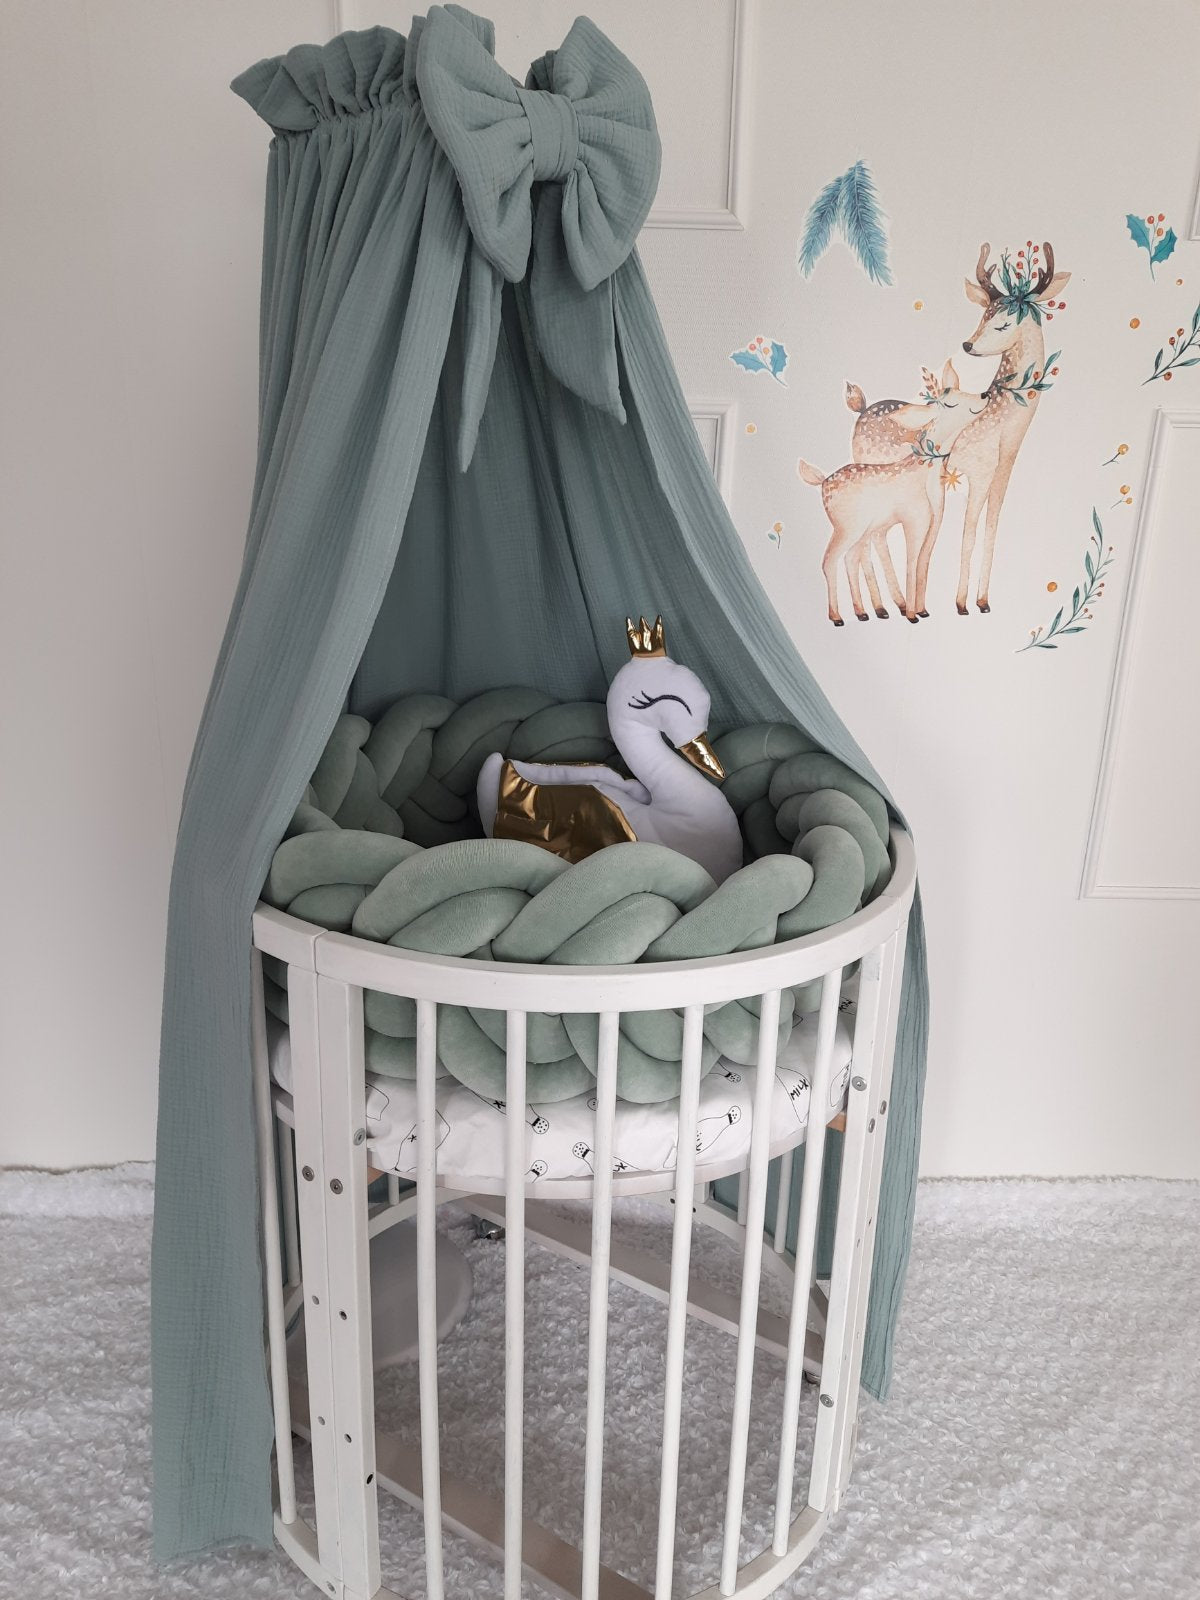 Sage Green Muslin Canopy with Bow + Swan as a gift